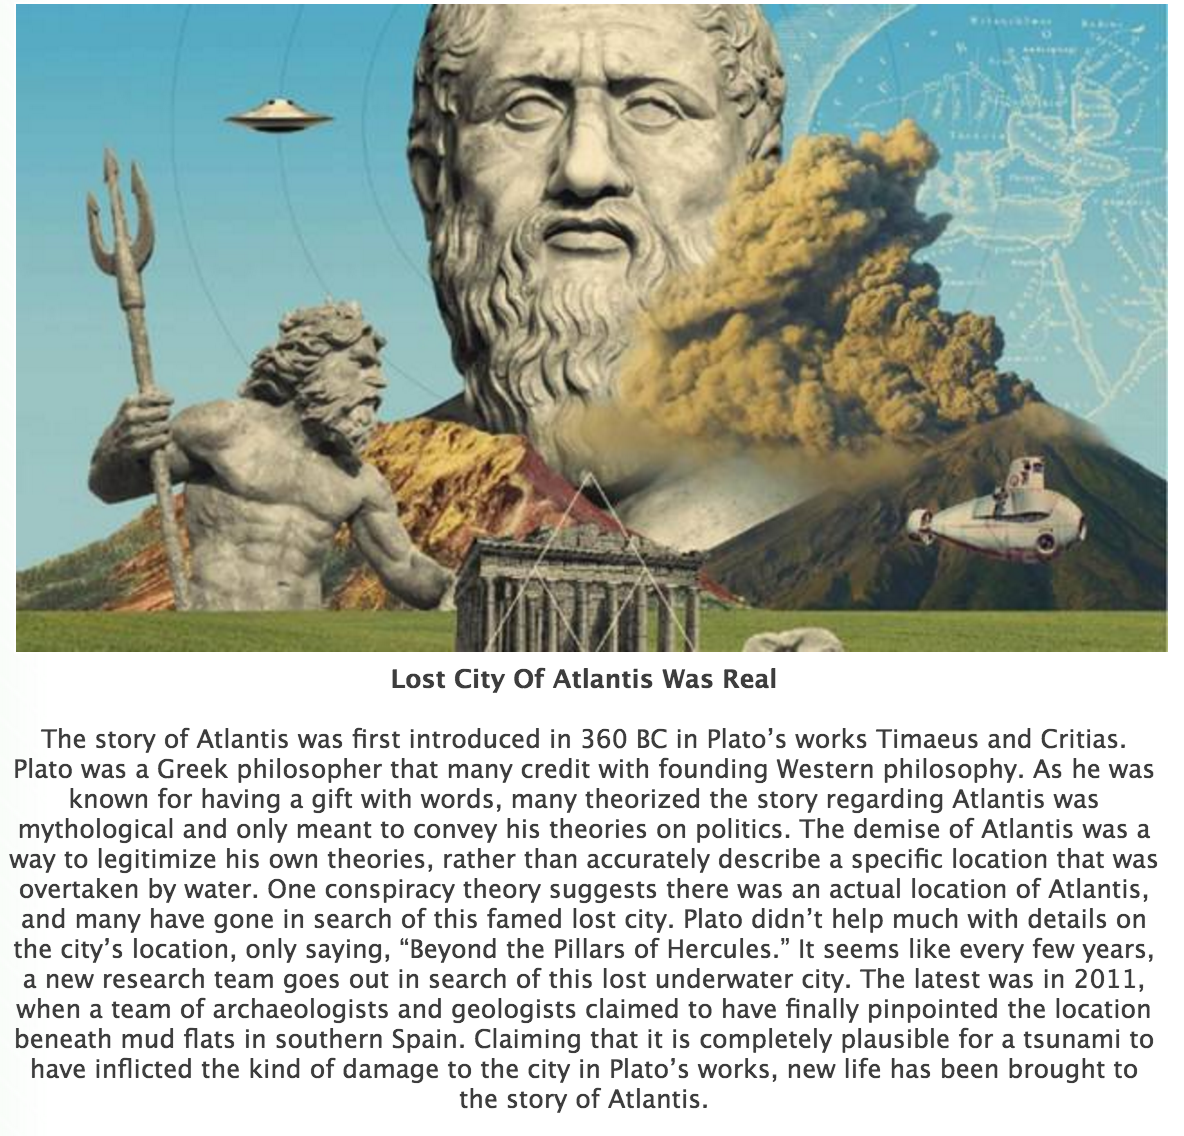 meet me in atlantis my obsessive quest - Lost City Of Atlantis Was Real The story of Atlantis was first introduced in 360 Bc in Plato's works Timaeus and Critias. Plato was a Greek philosopher that many credit with founding Western philosophy. As he was k